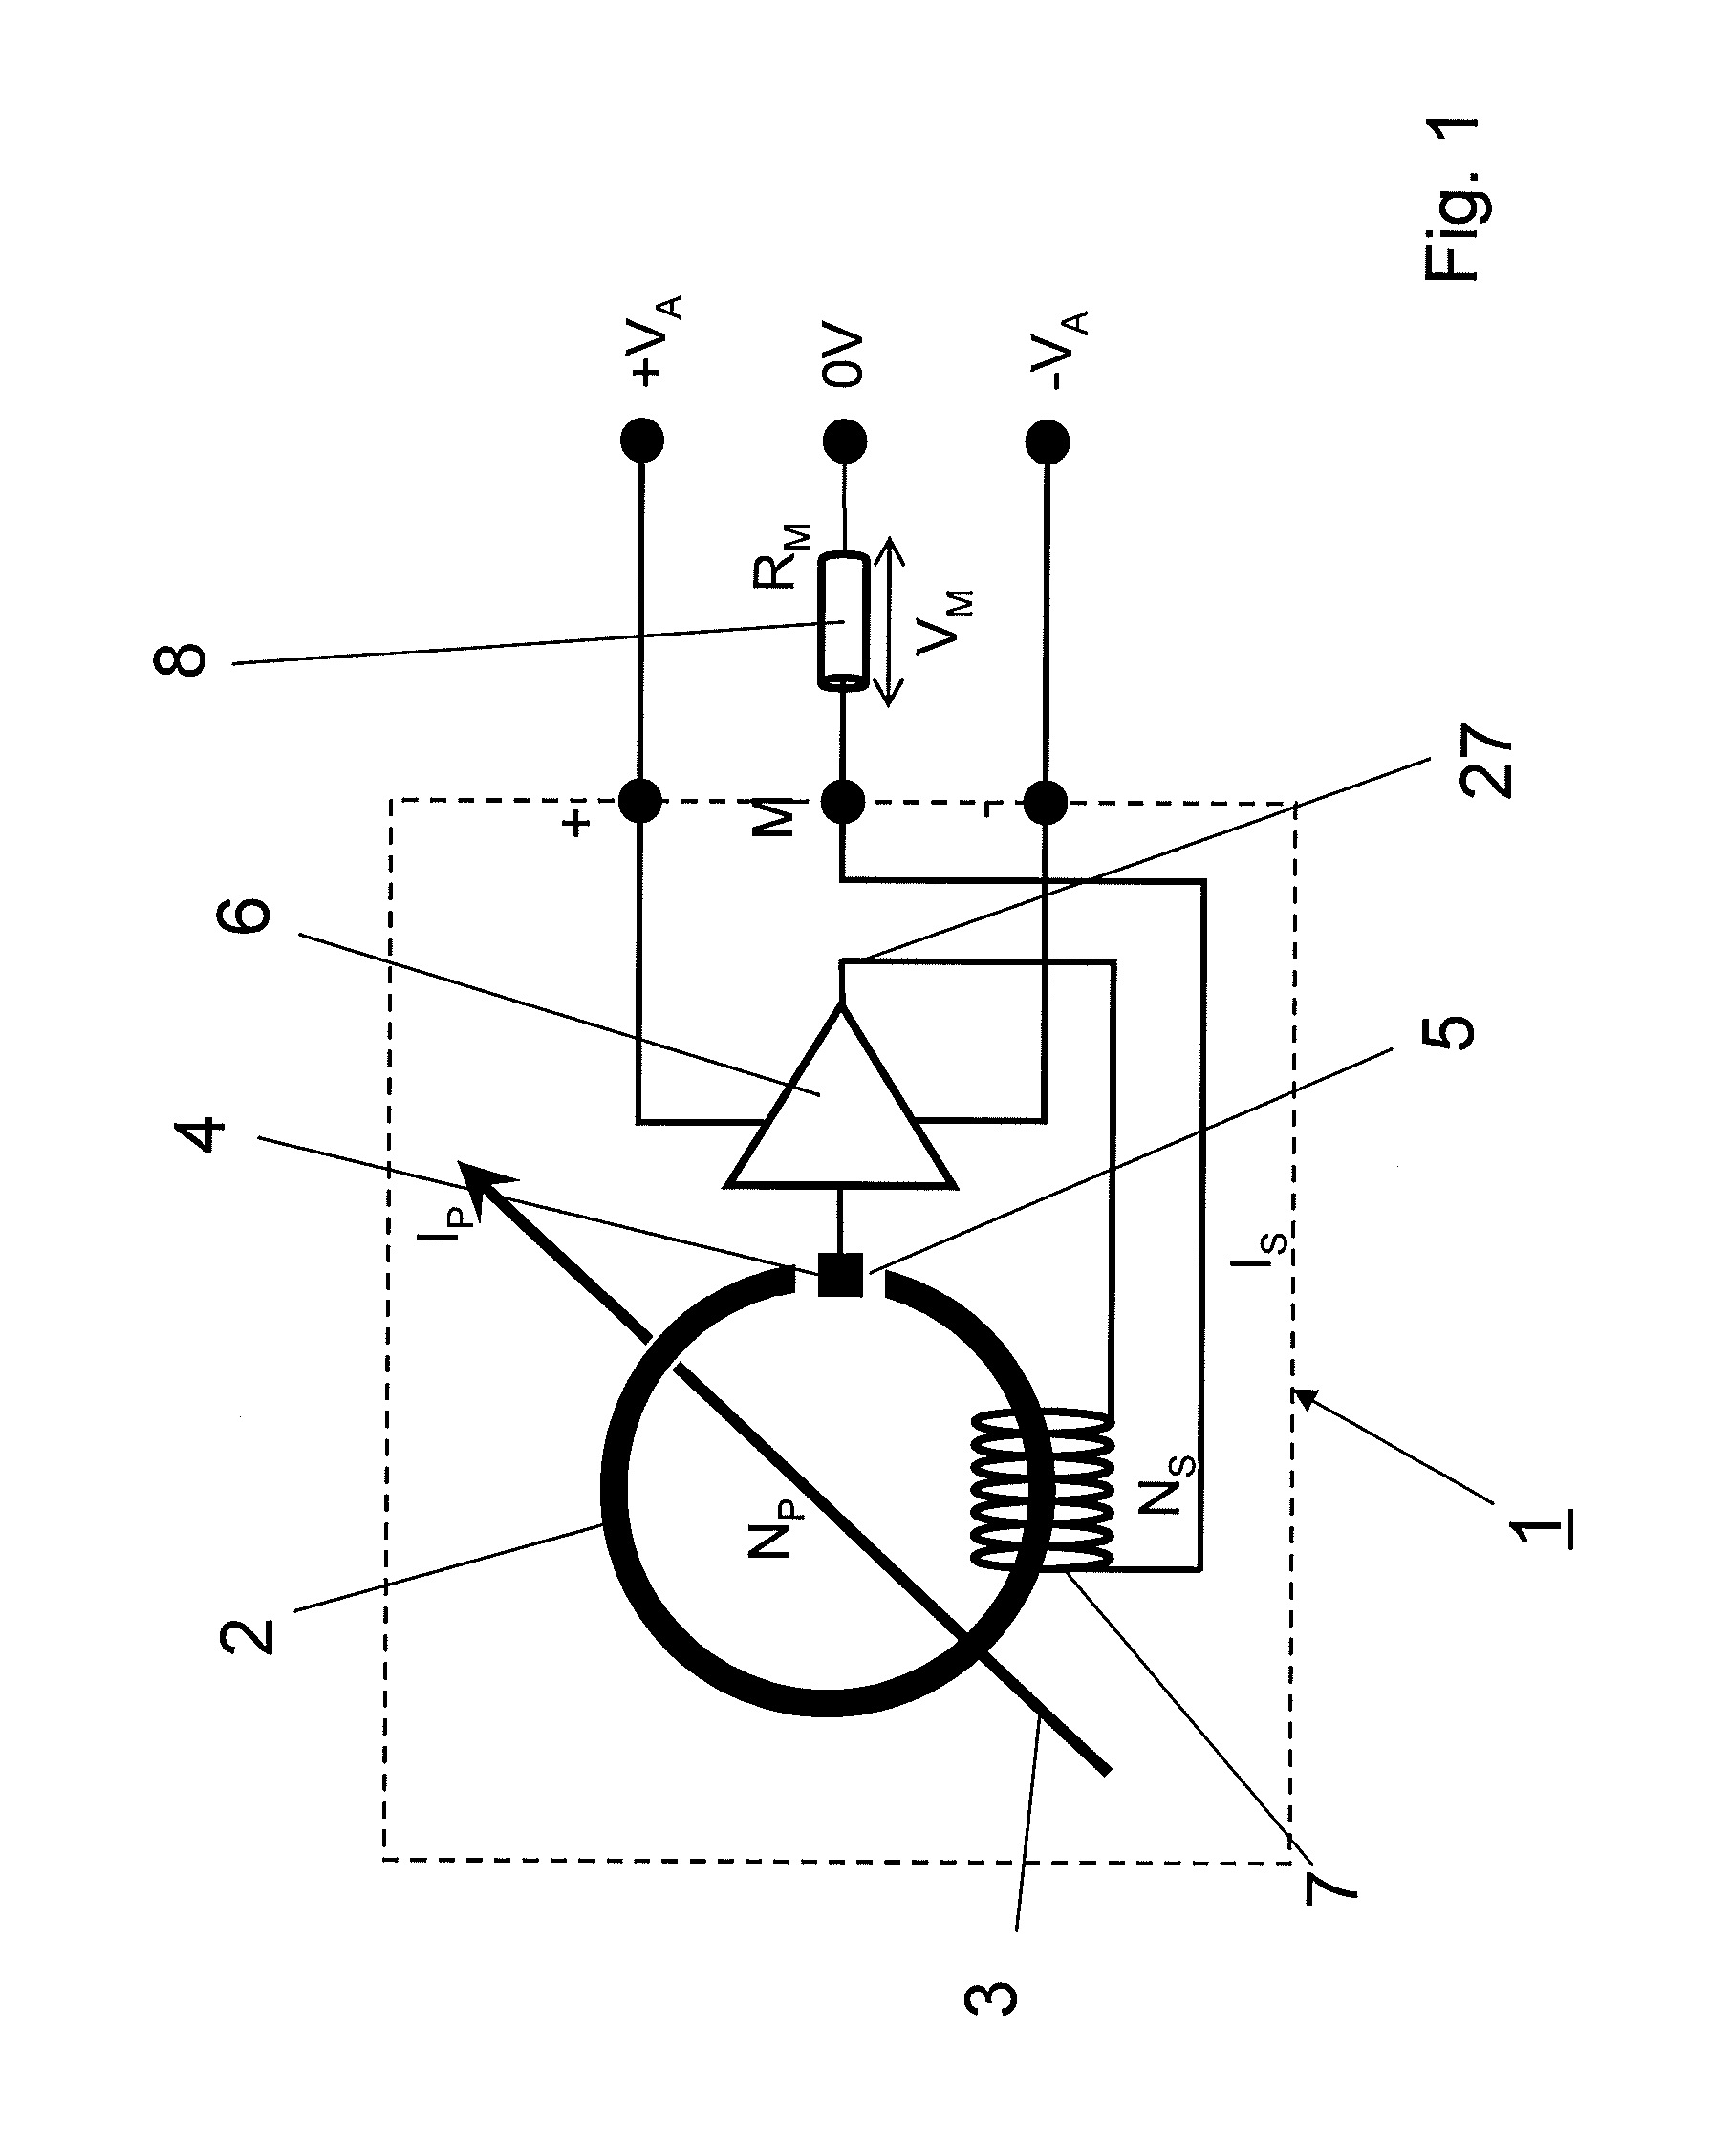 Current sensor operating in accordance with the principle of compensation